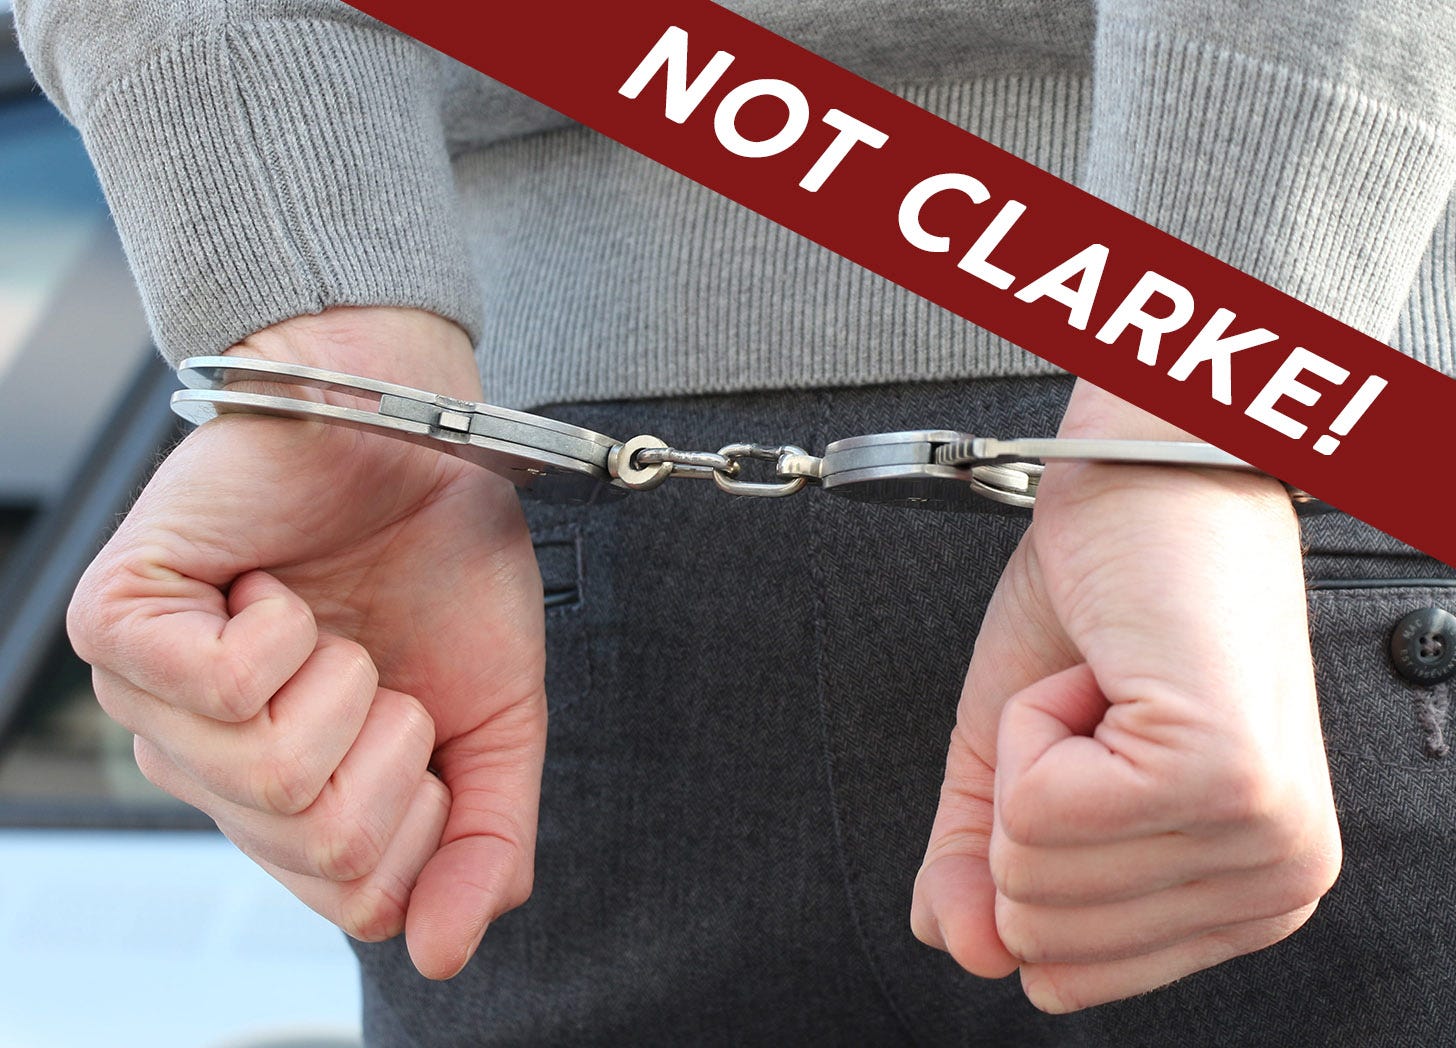 Close up of hands cuffed behind back. Text on top reads "Not Clarke!"